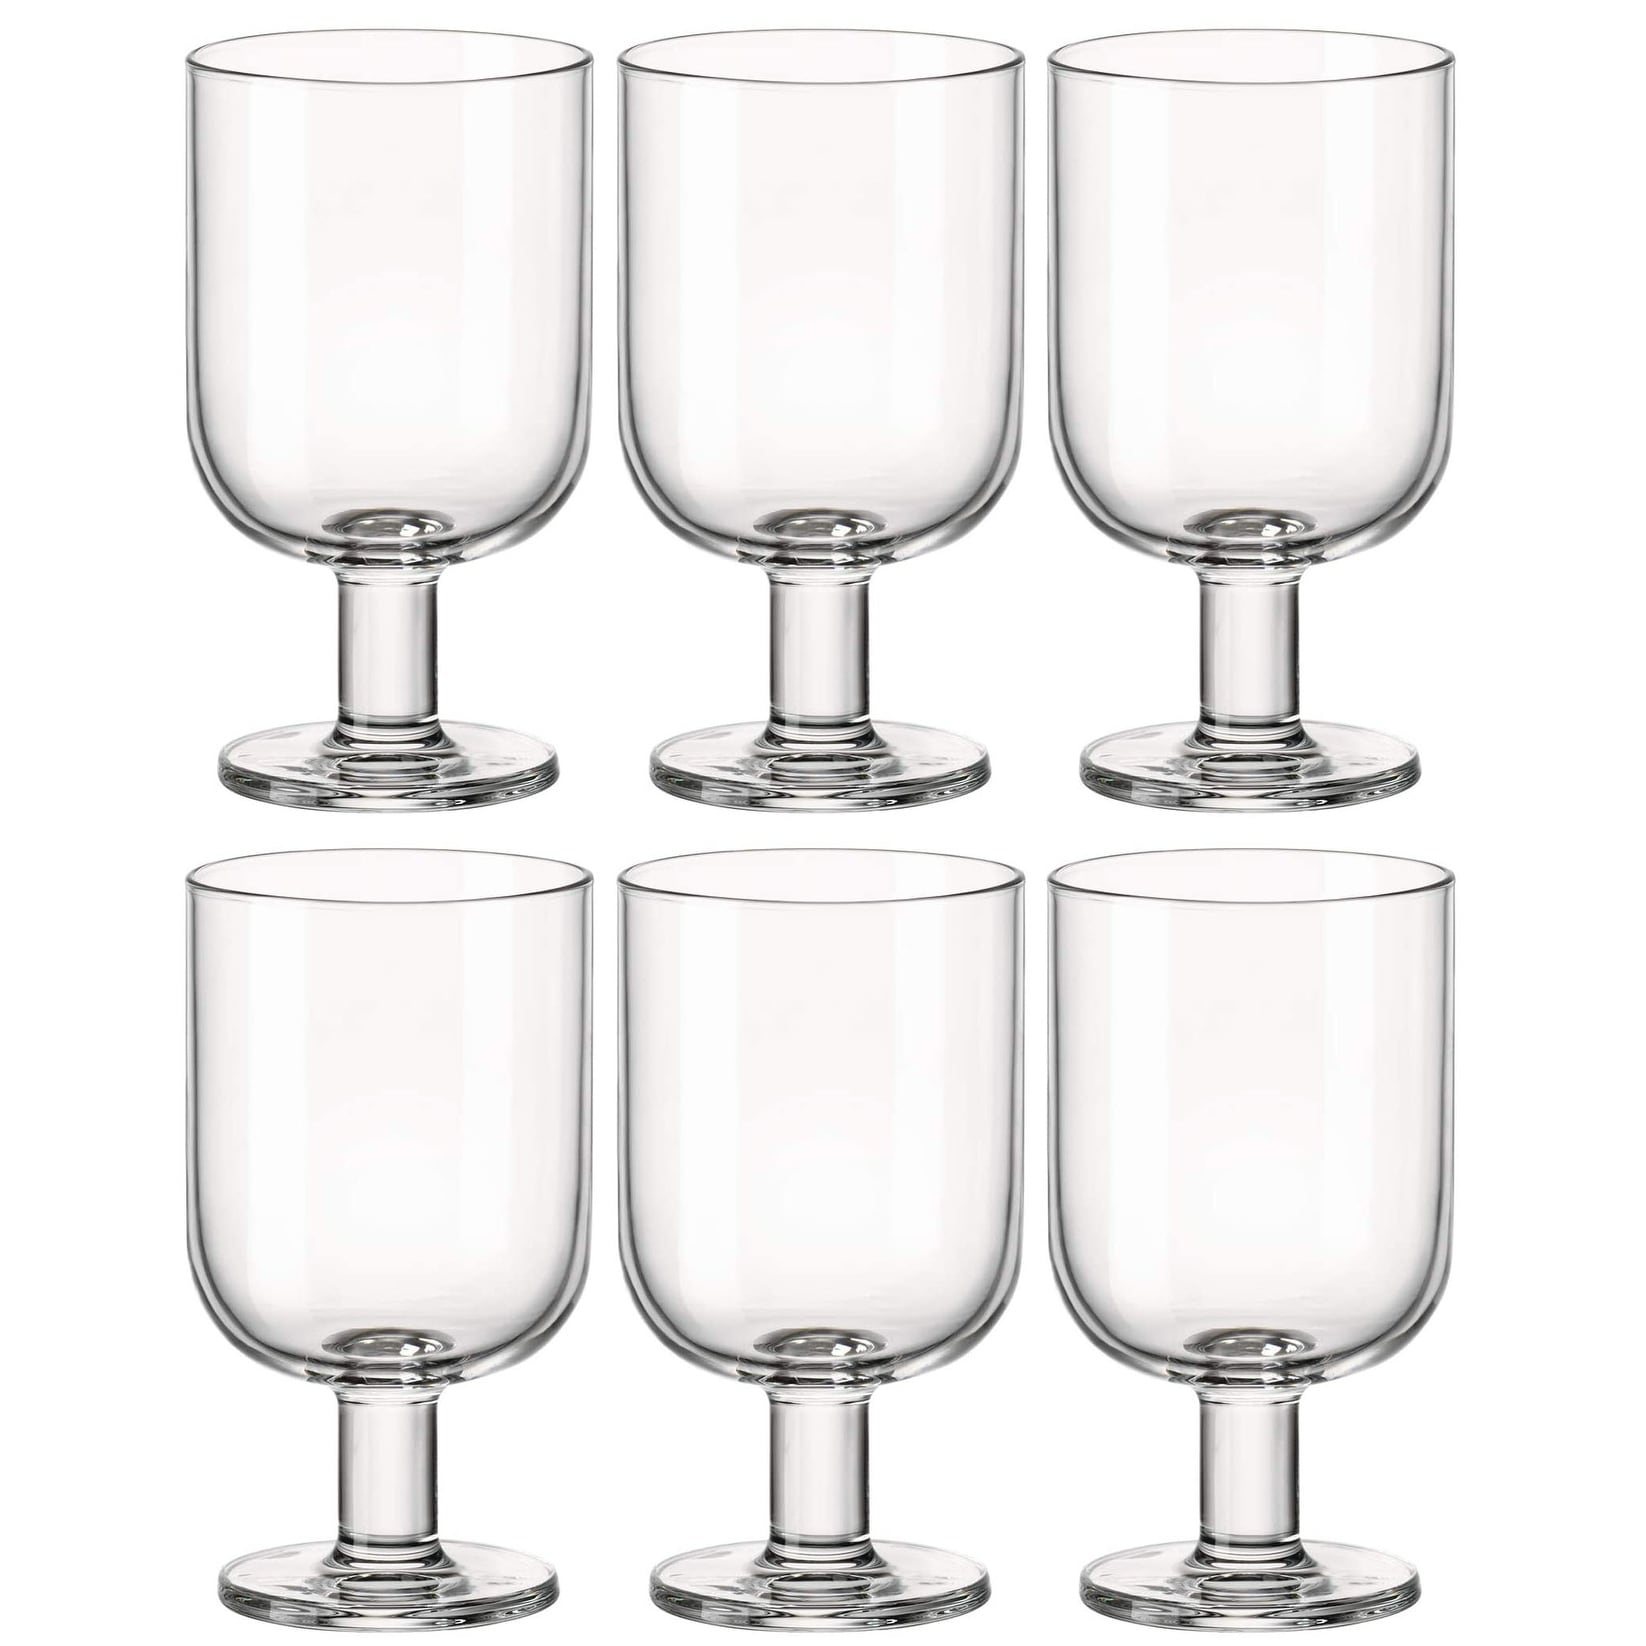 https://ak1.ostkcdn.com/images/products/is/images/direct/1ff1bbc9065574342aa632cfdc0ce034ab862b5f/Bormioli-Rocco-Hosteria-11.75-oz-Goblet-Glass%2C-Set-of-6.jpg